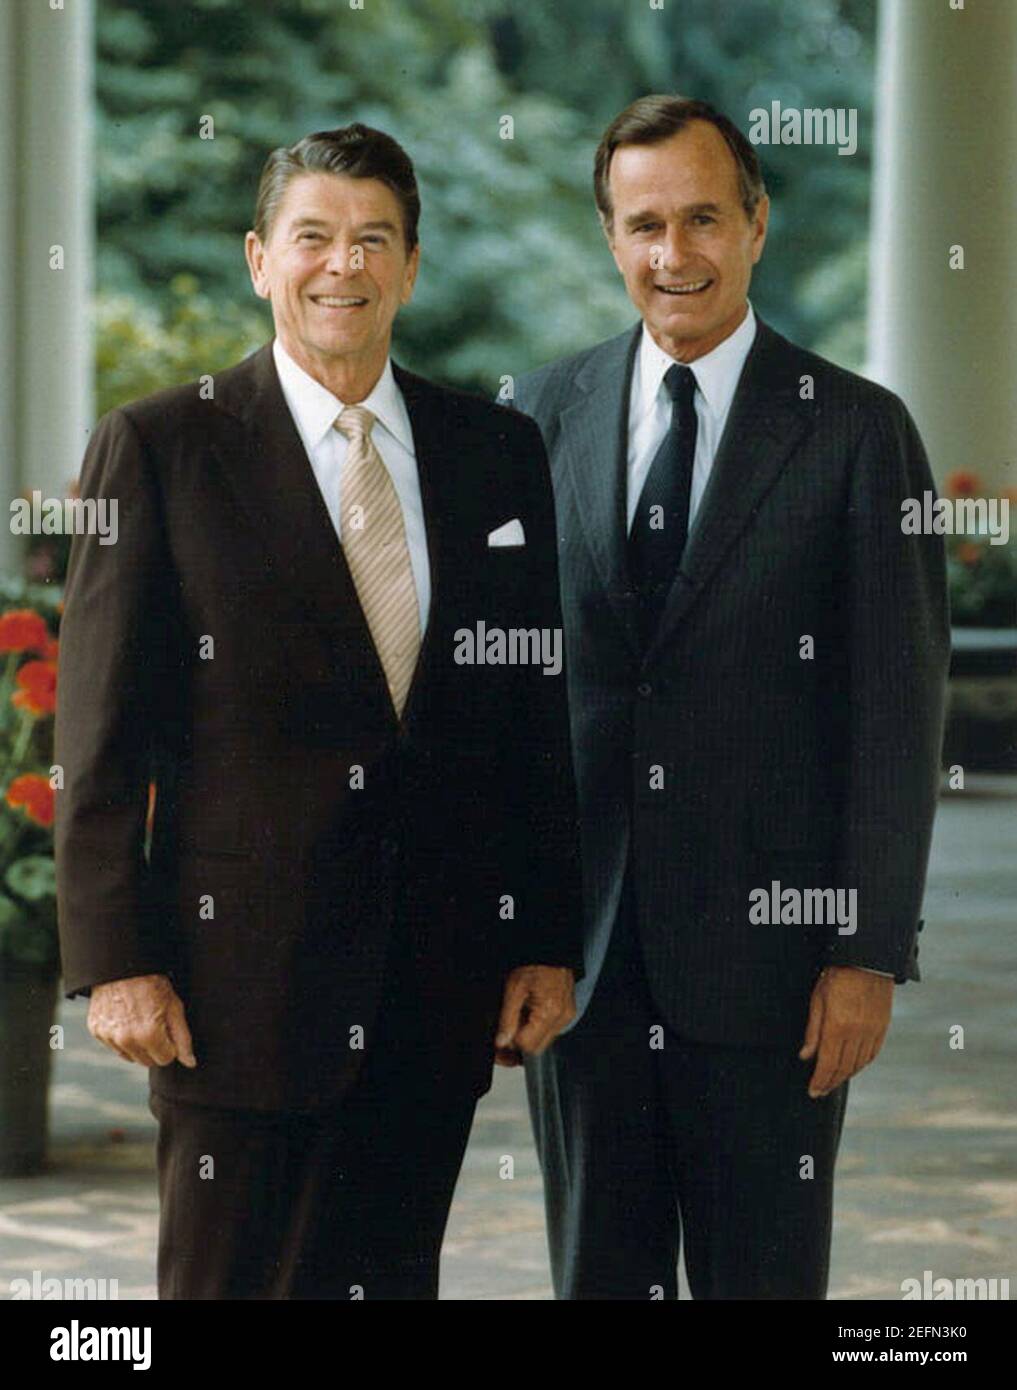 Official portrait of President Reagan and Vice President Bush 1981. Stock Photo